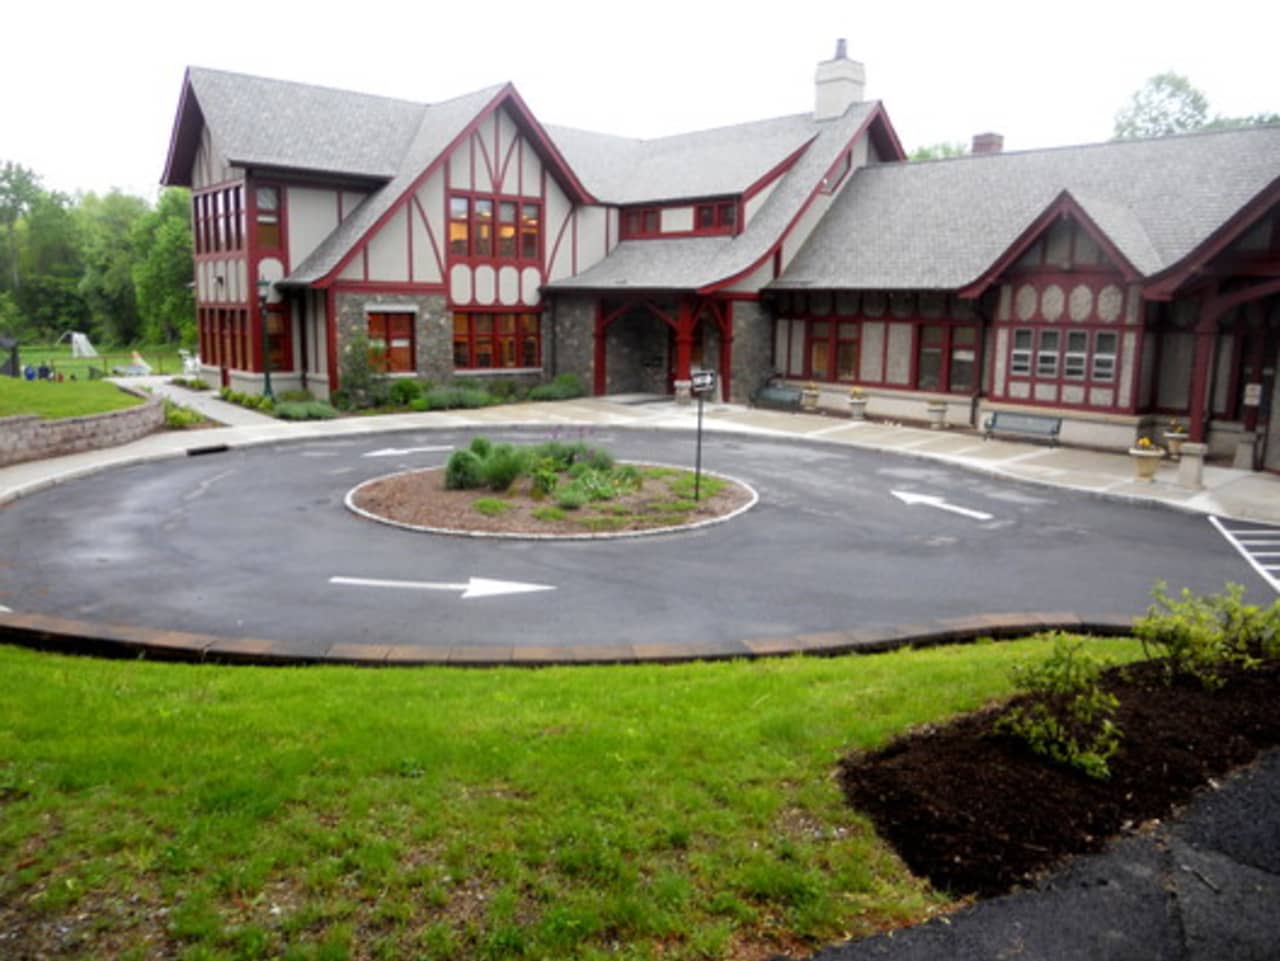 Briarcliff Manor Public Library will host a presentation on chaos.